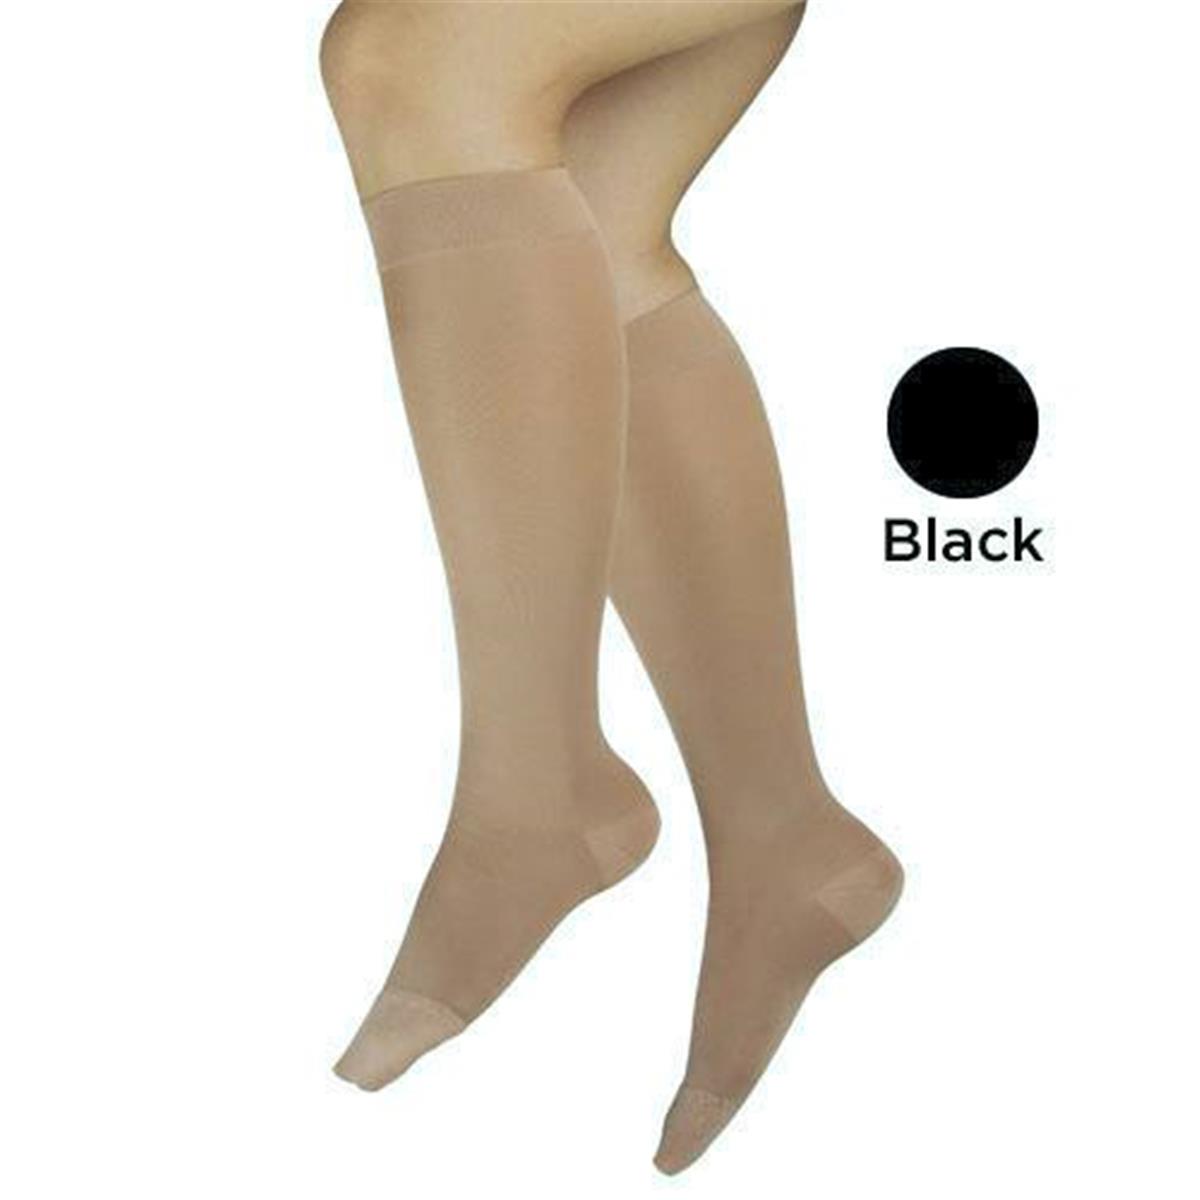 Picture of Blue Jay BJ395BLL 15-20 mmHg MicroFiber Moderate Large Knee Highs&#44; Black